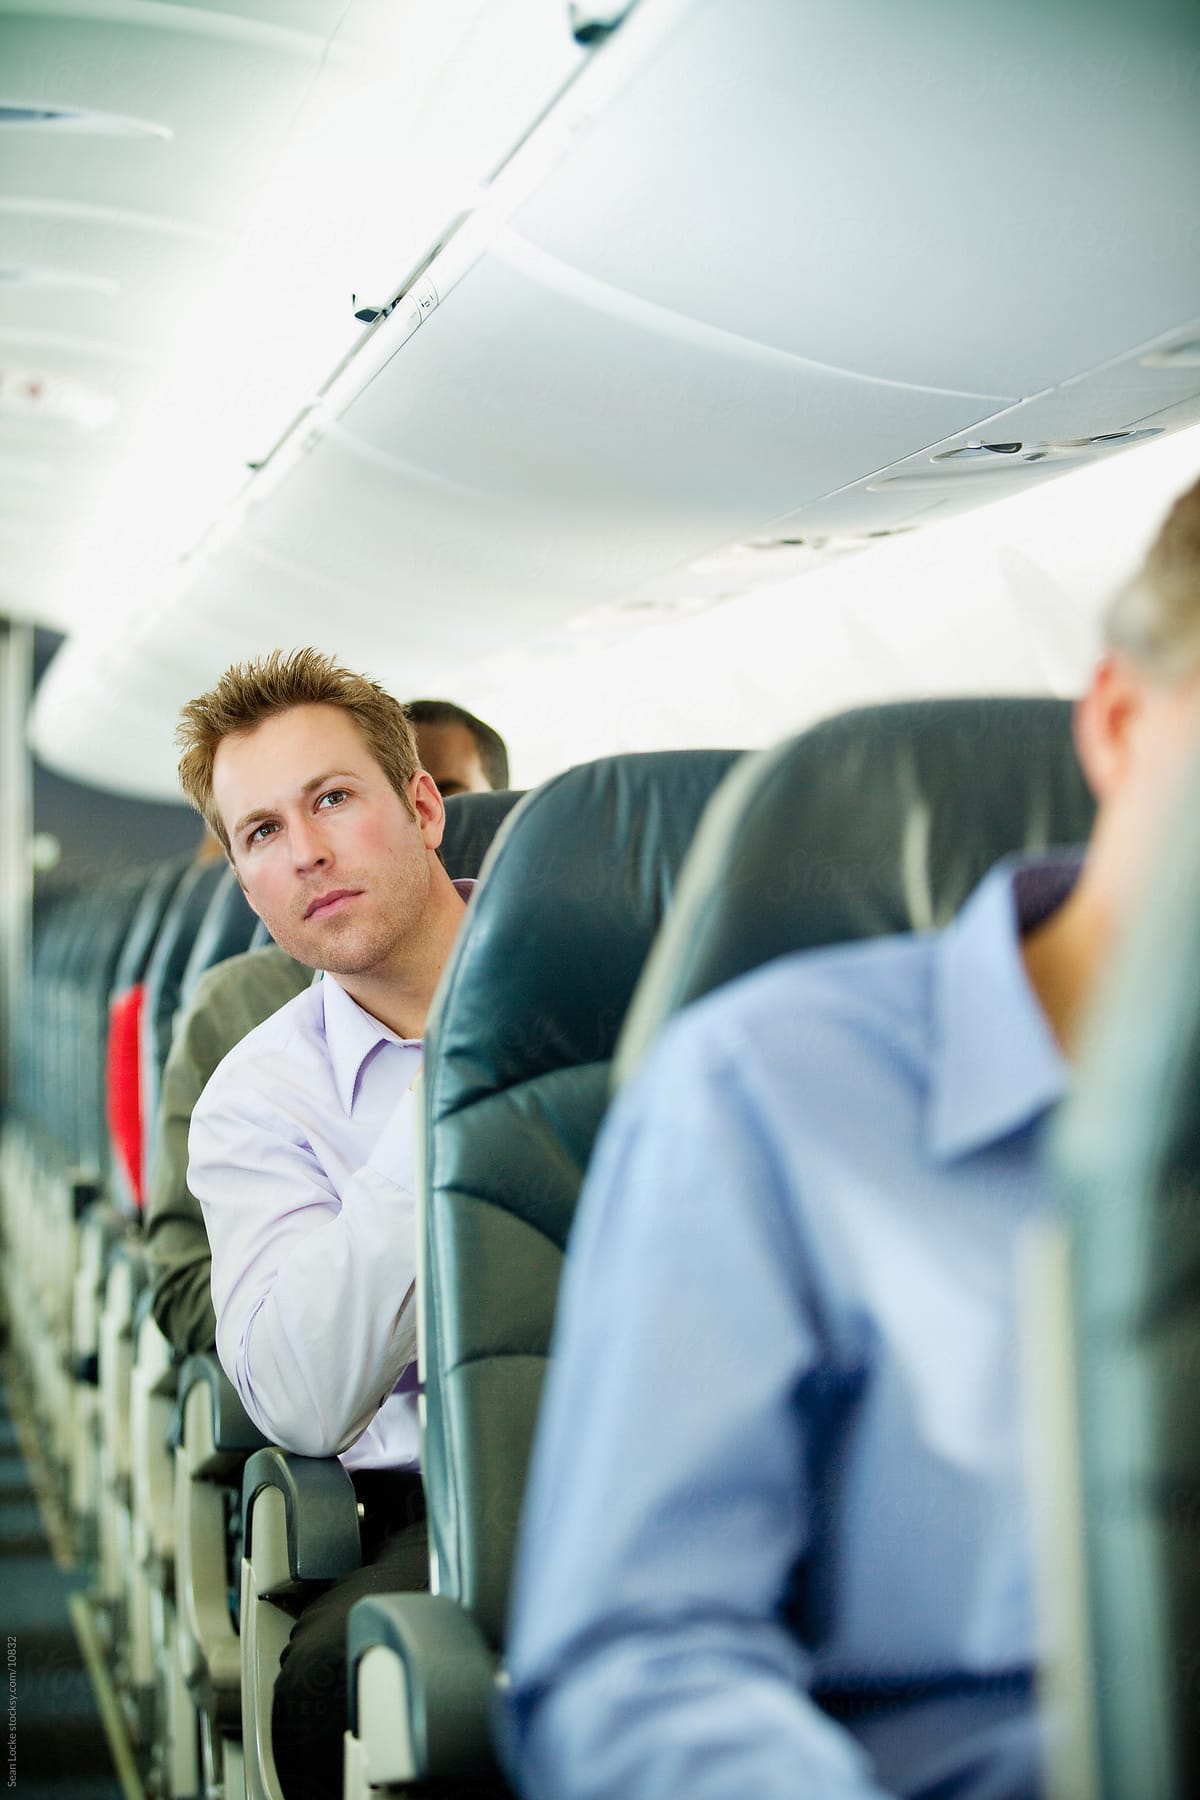 Airplane: Concerned Passenger Looks Down Aisle